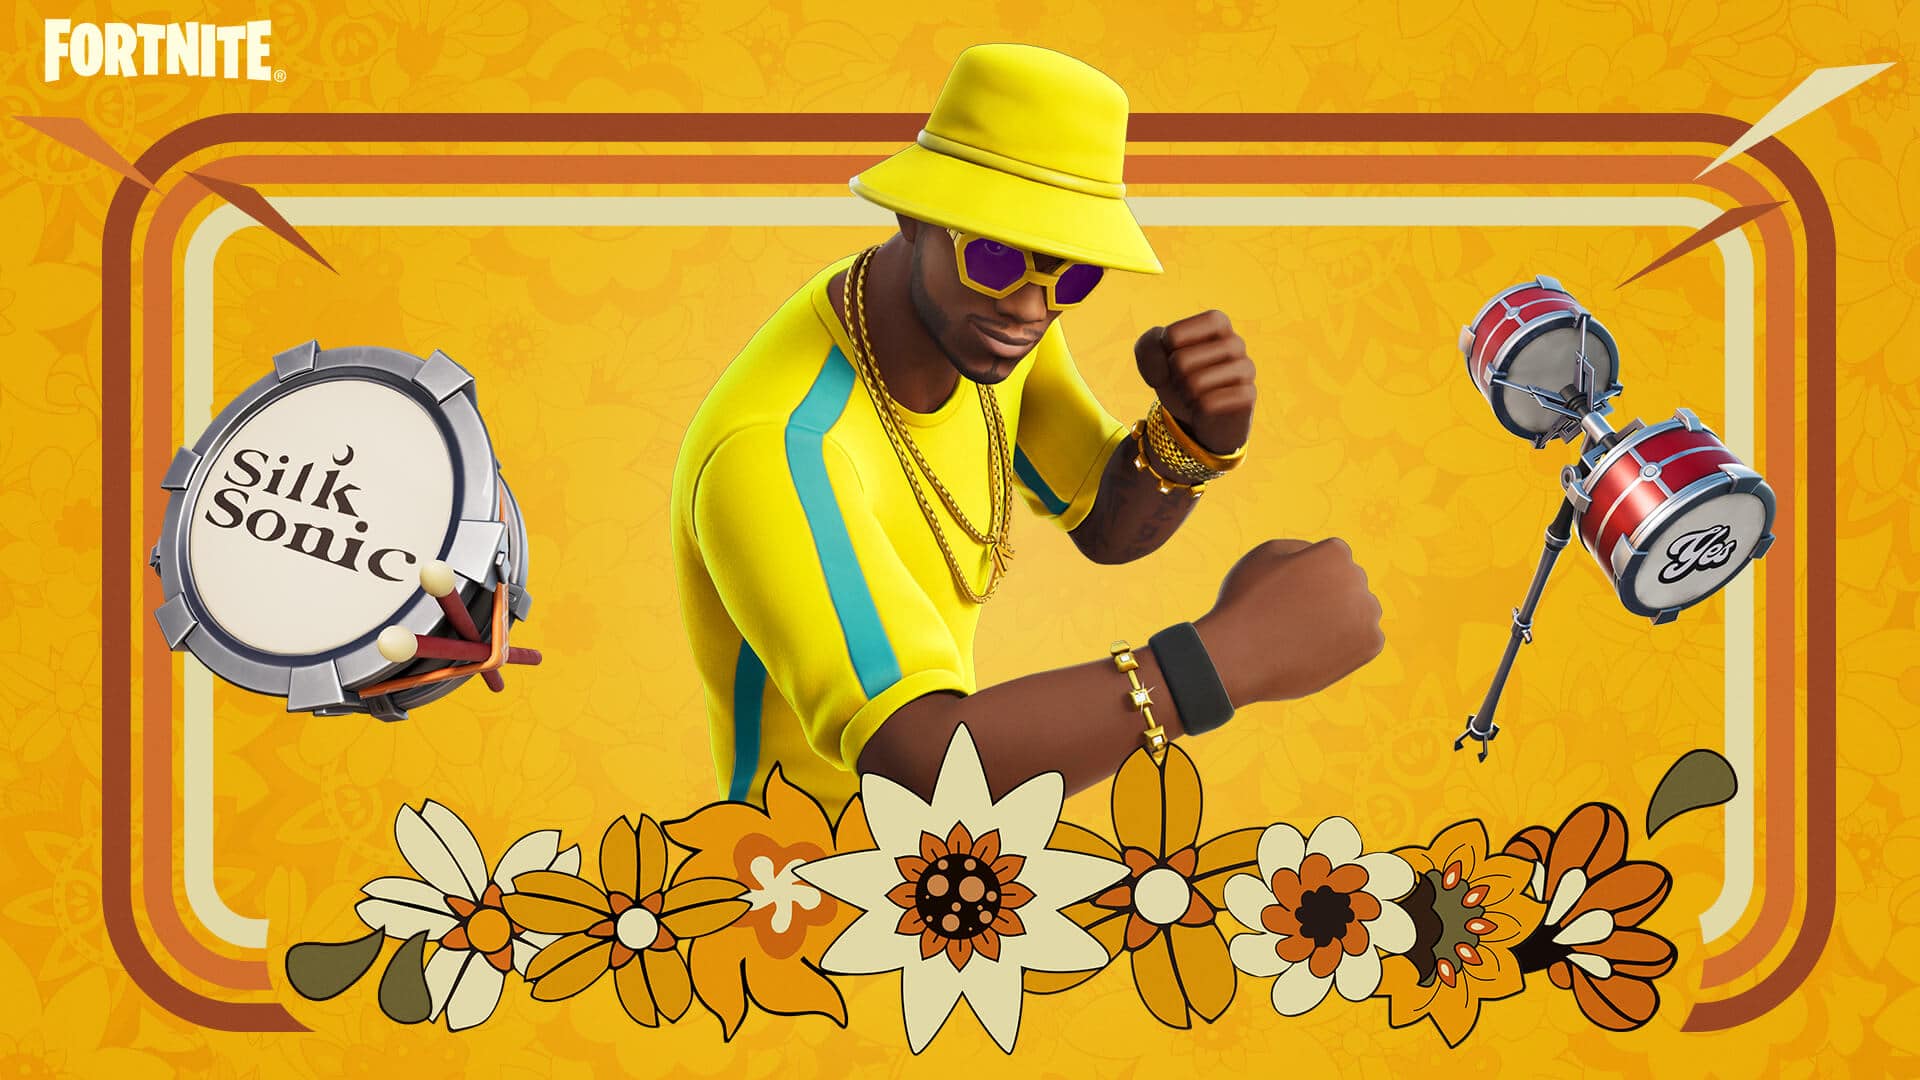 Bruno Mars and Anderson .Paak will get their own Fortnite outfits